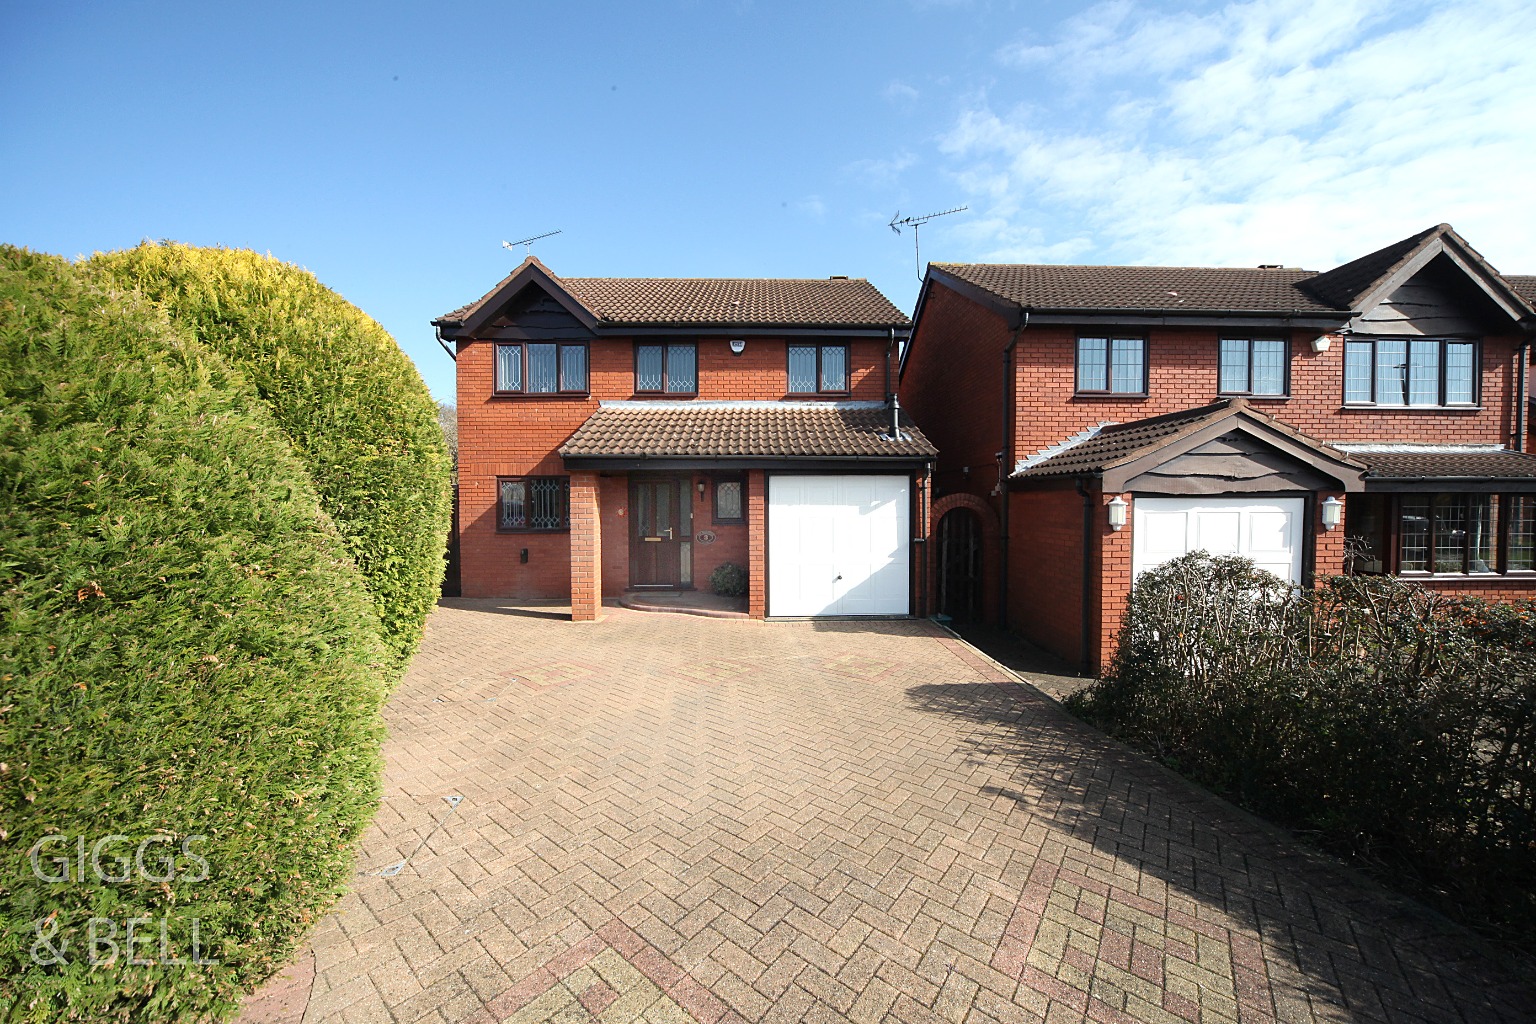 4 bed detached house for sale in Copthorne, Luton  - Property Image 1